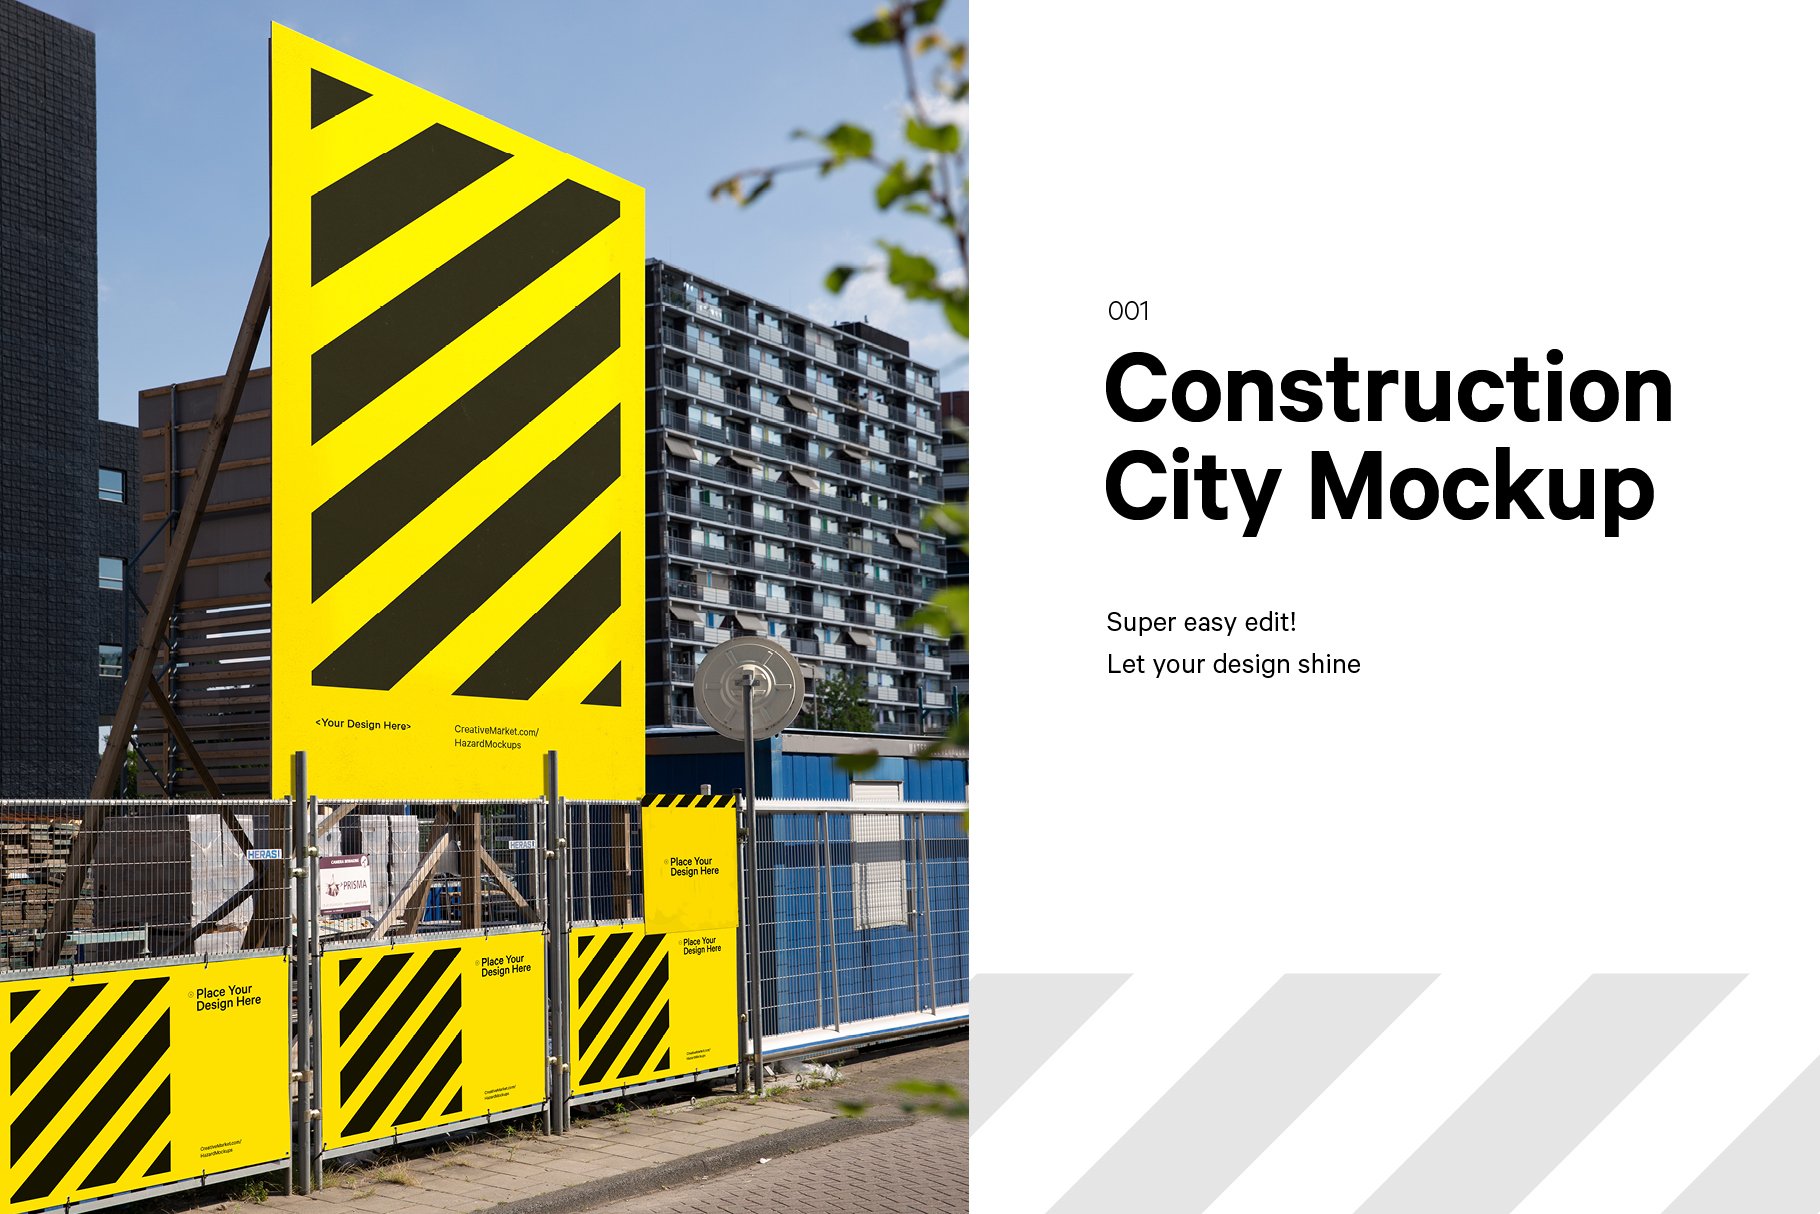 City Construction Mockup cover image.